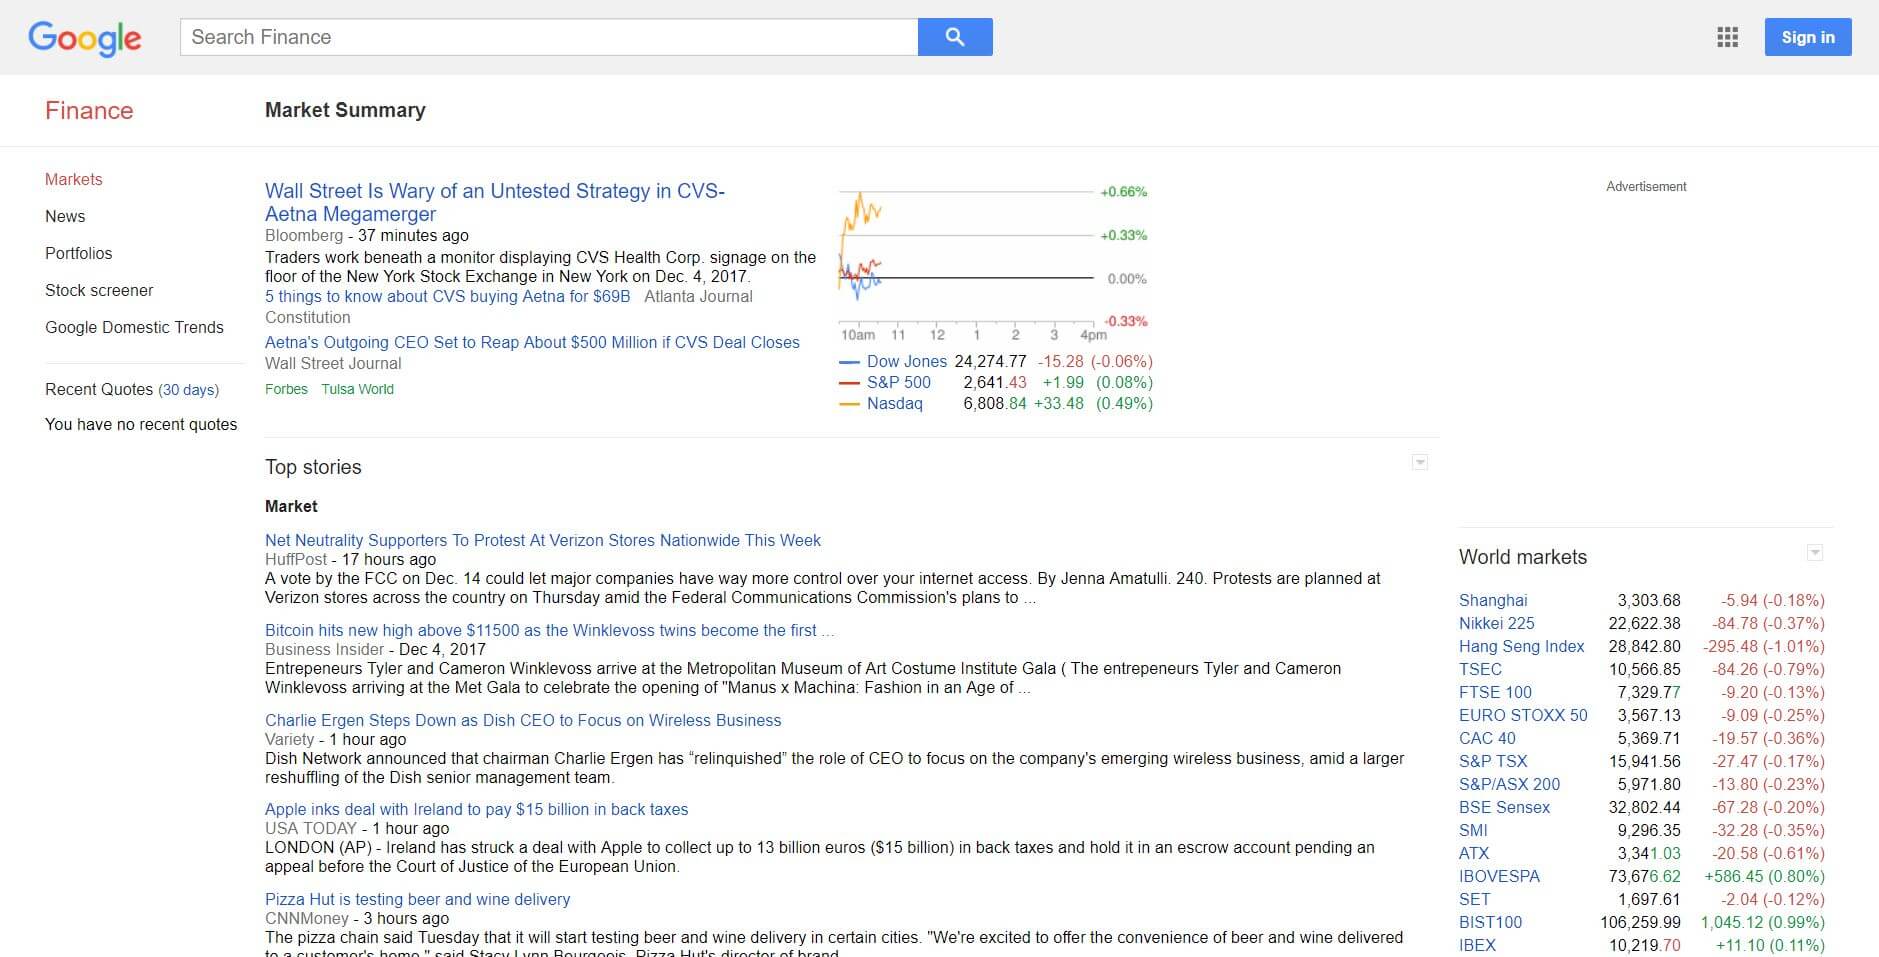 The former layout of Google Finance, with more content